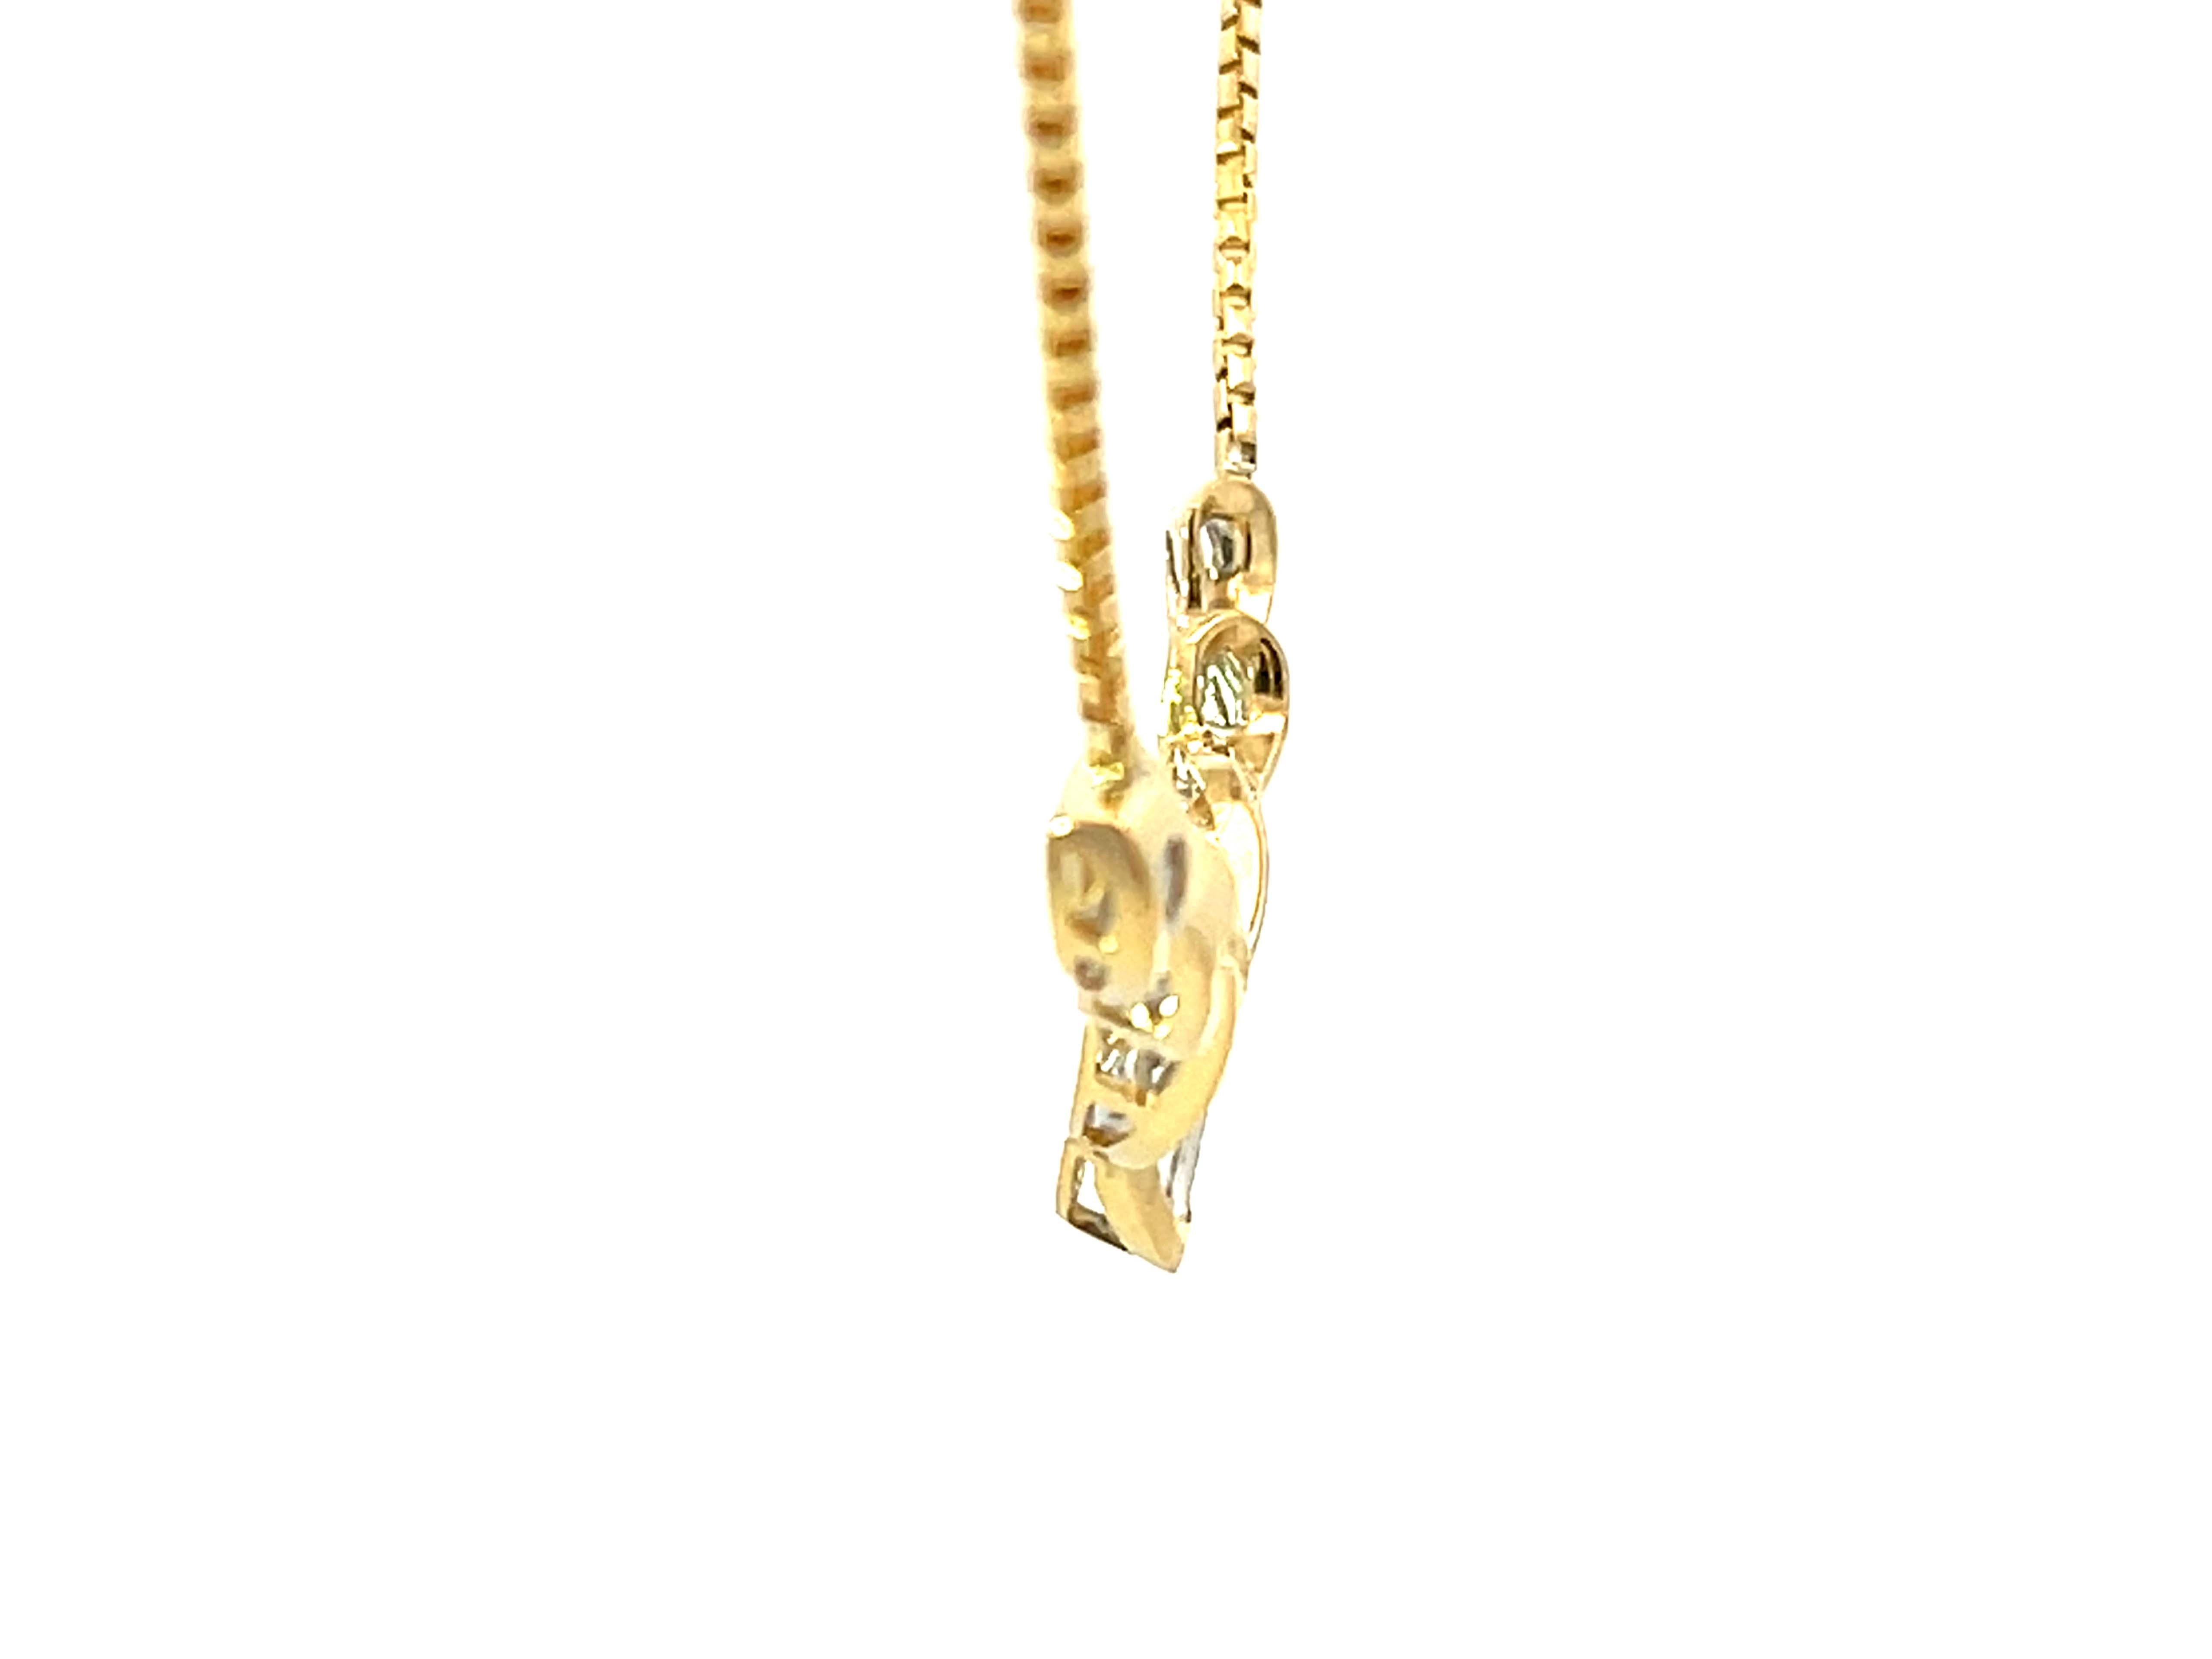 Solid 18k Yellow Gold Baguette Diamond Swirl Pendant Necklace In Excellent Condition For Sale In Honolulu, HI